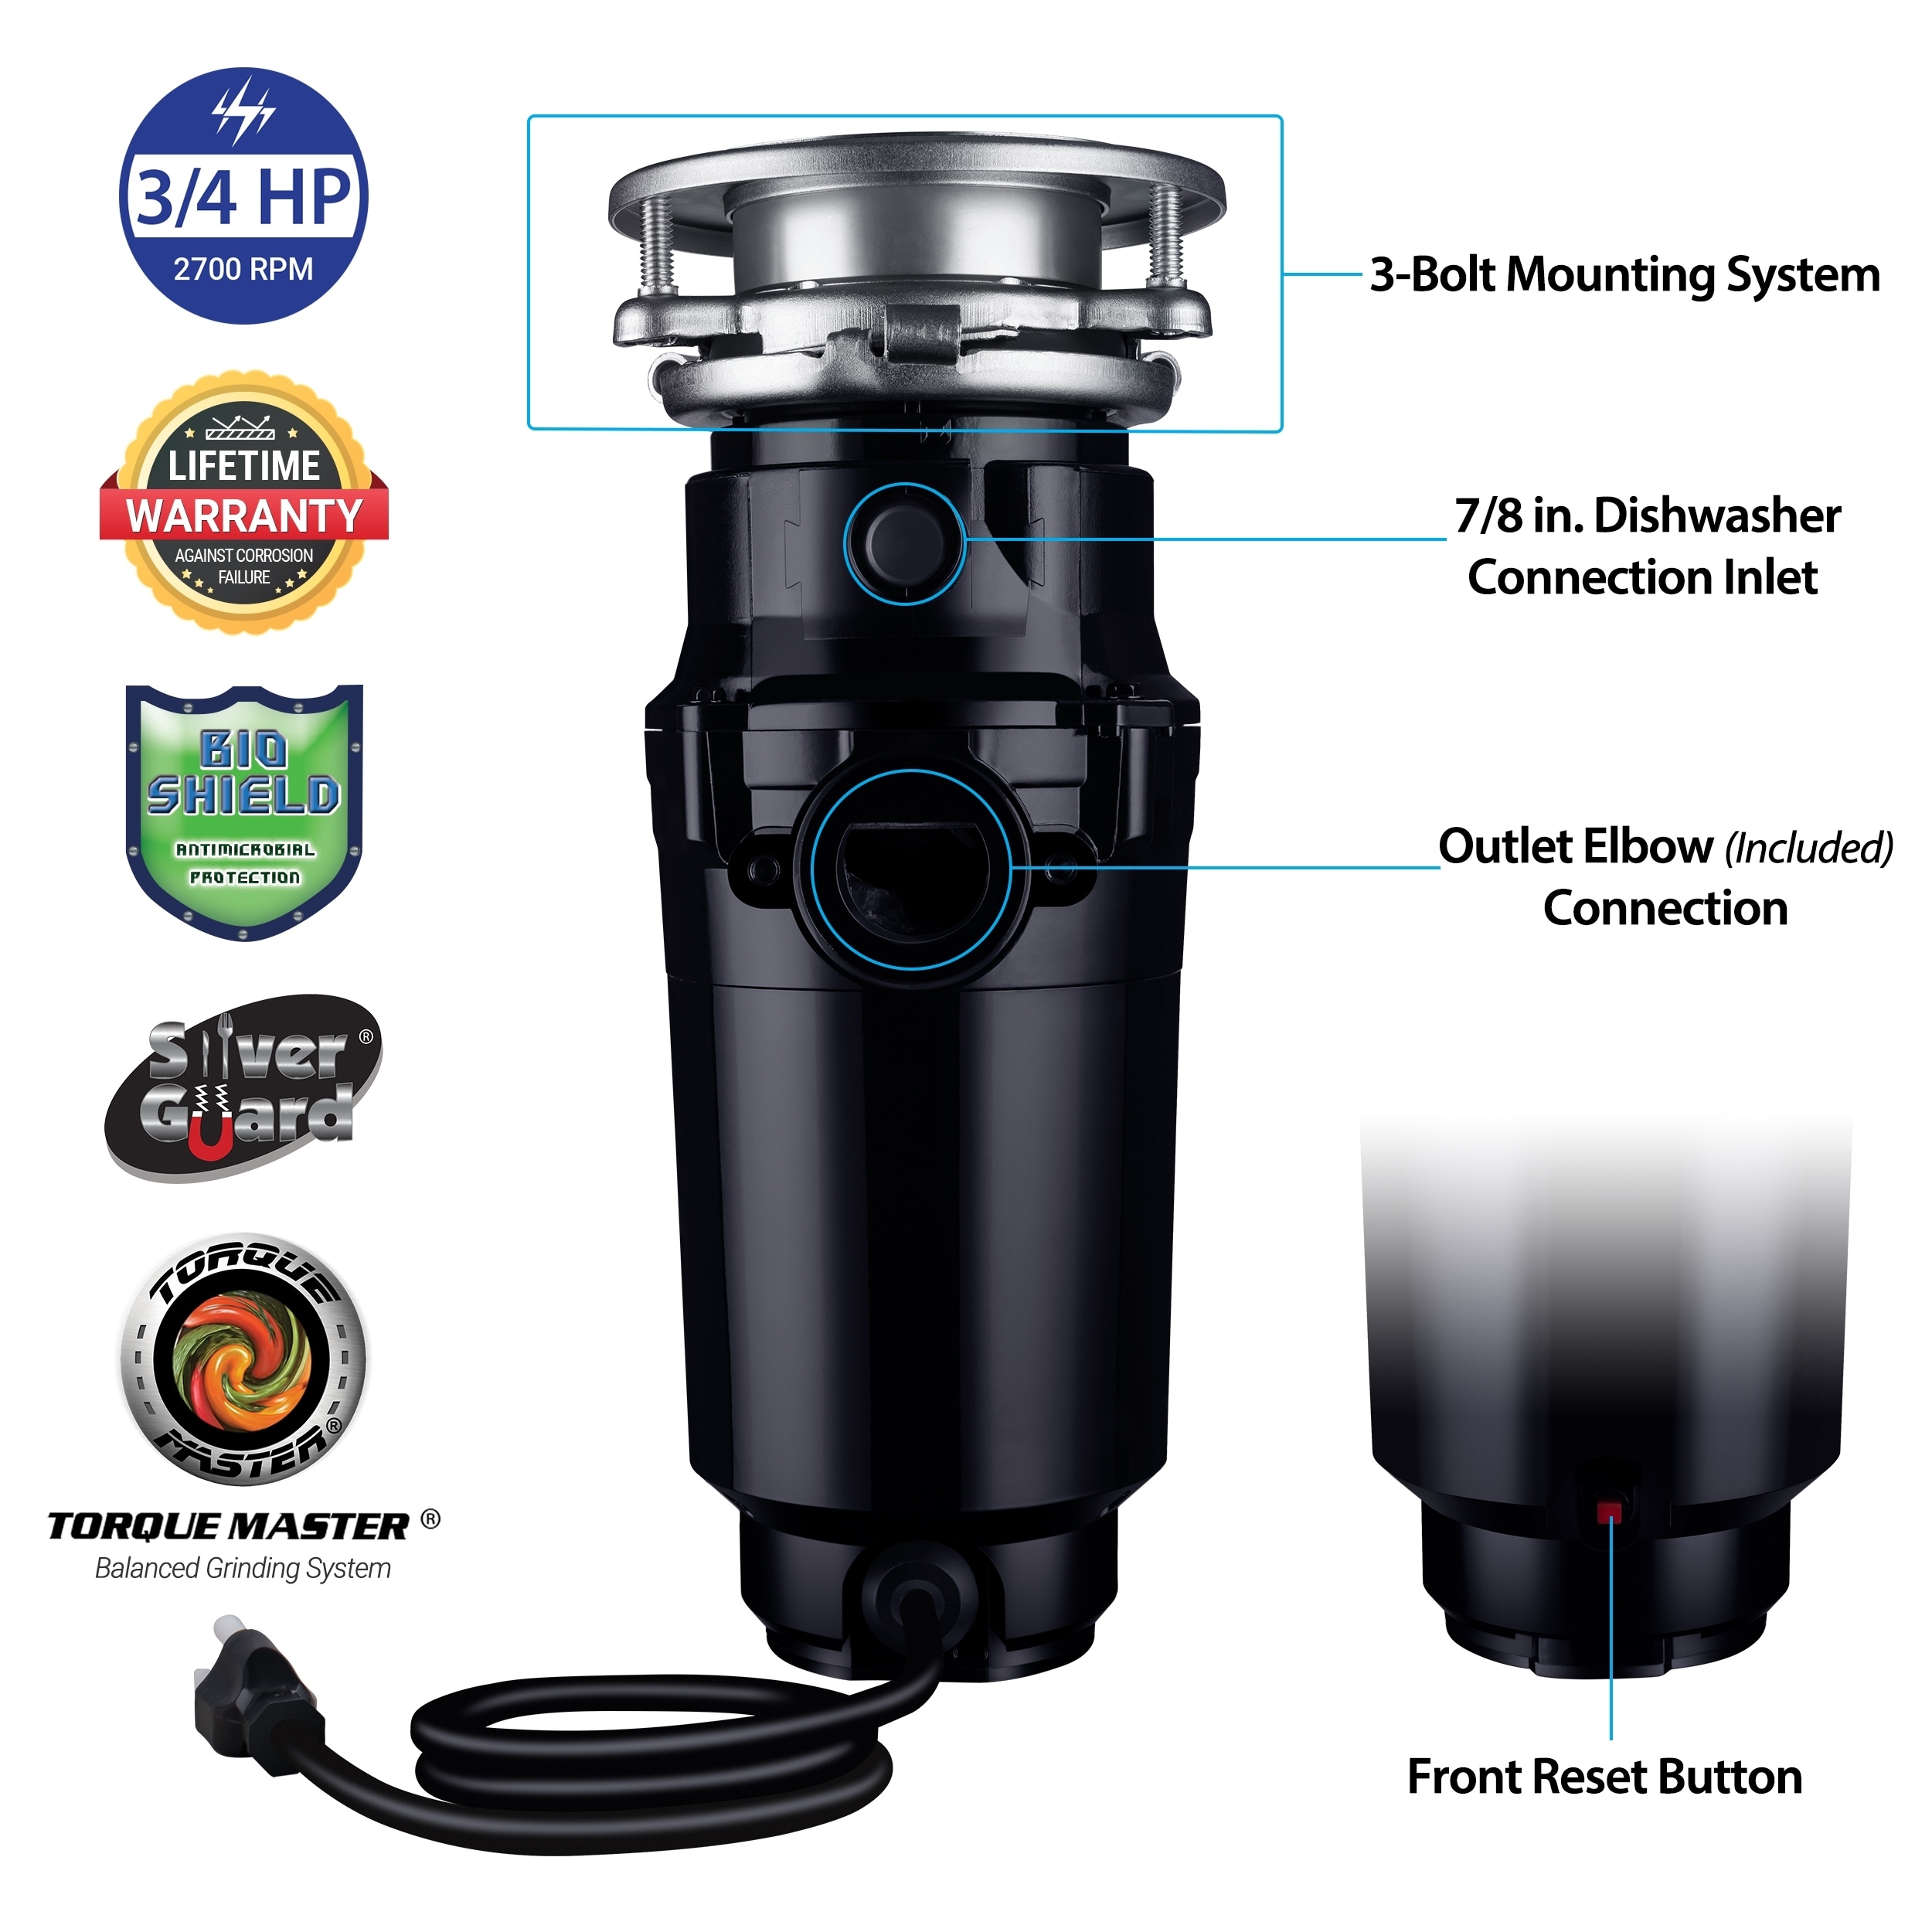 Waste Maid 3/4 HP Slim Line Garbage Disposal with Attached Power Cord 3/4  hp On Sale Bed Bath  Beyond 35631290